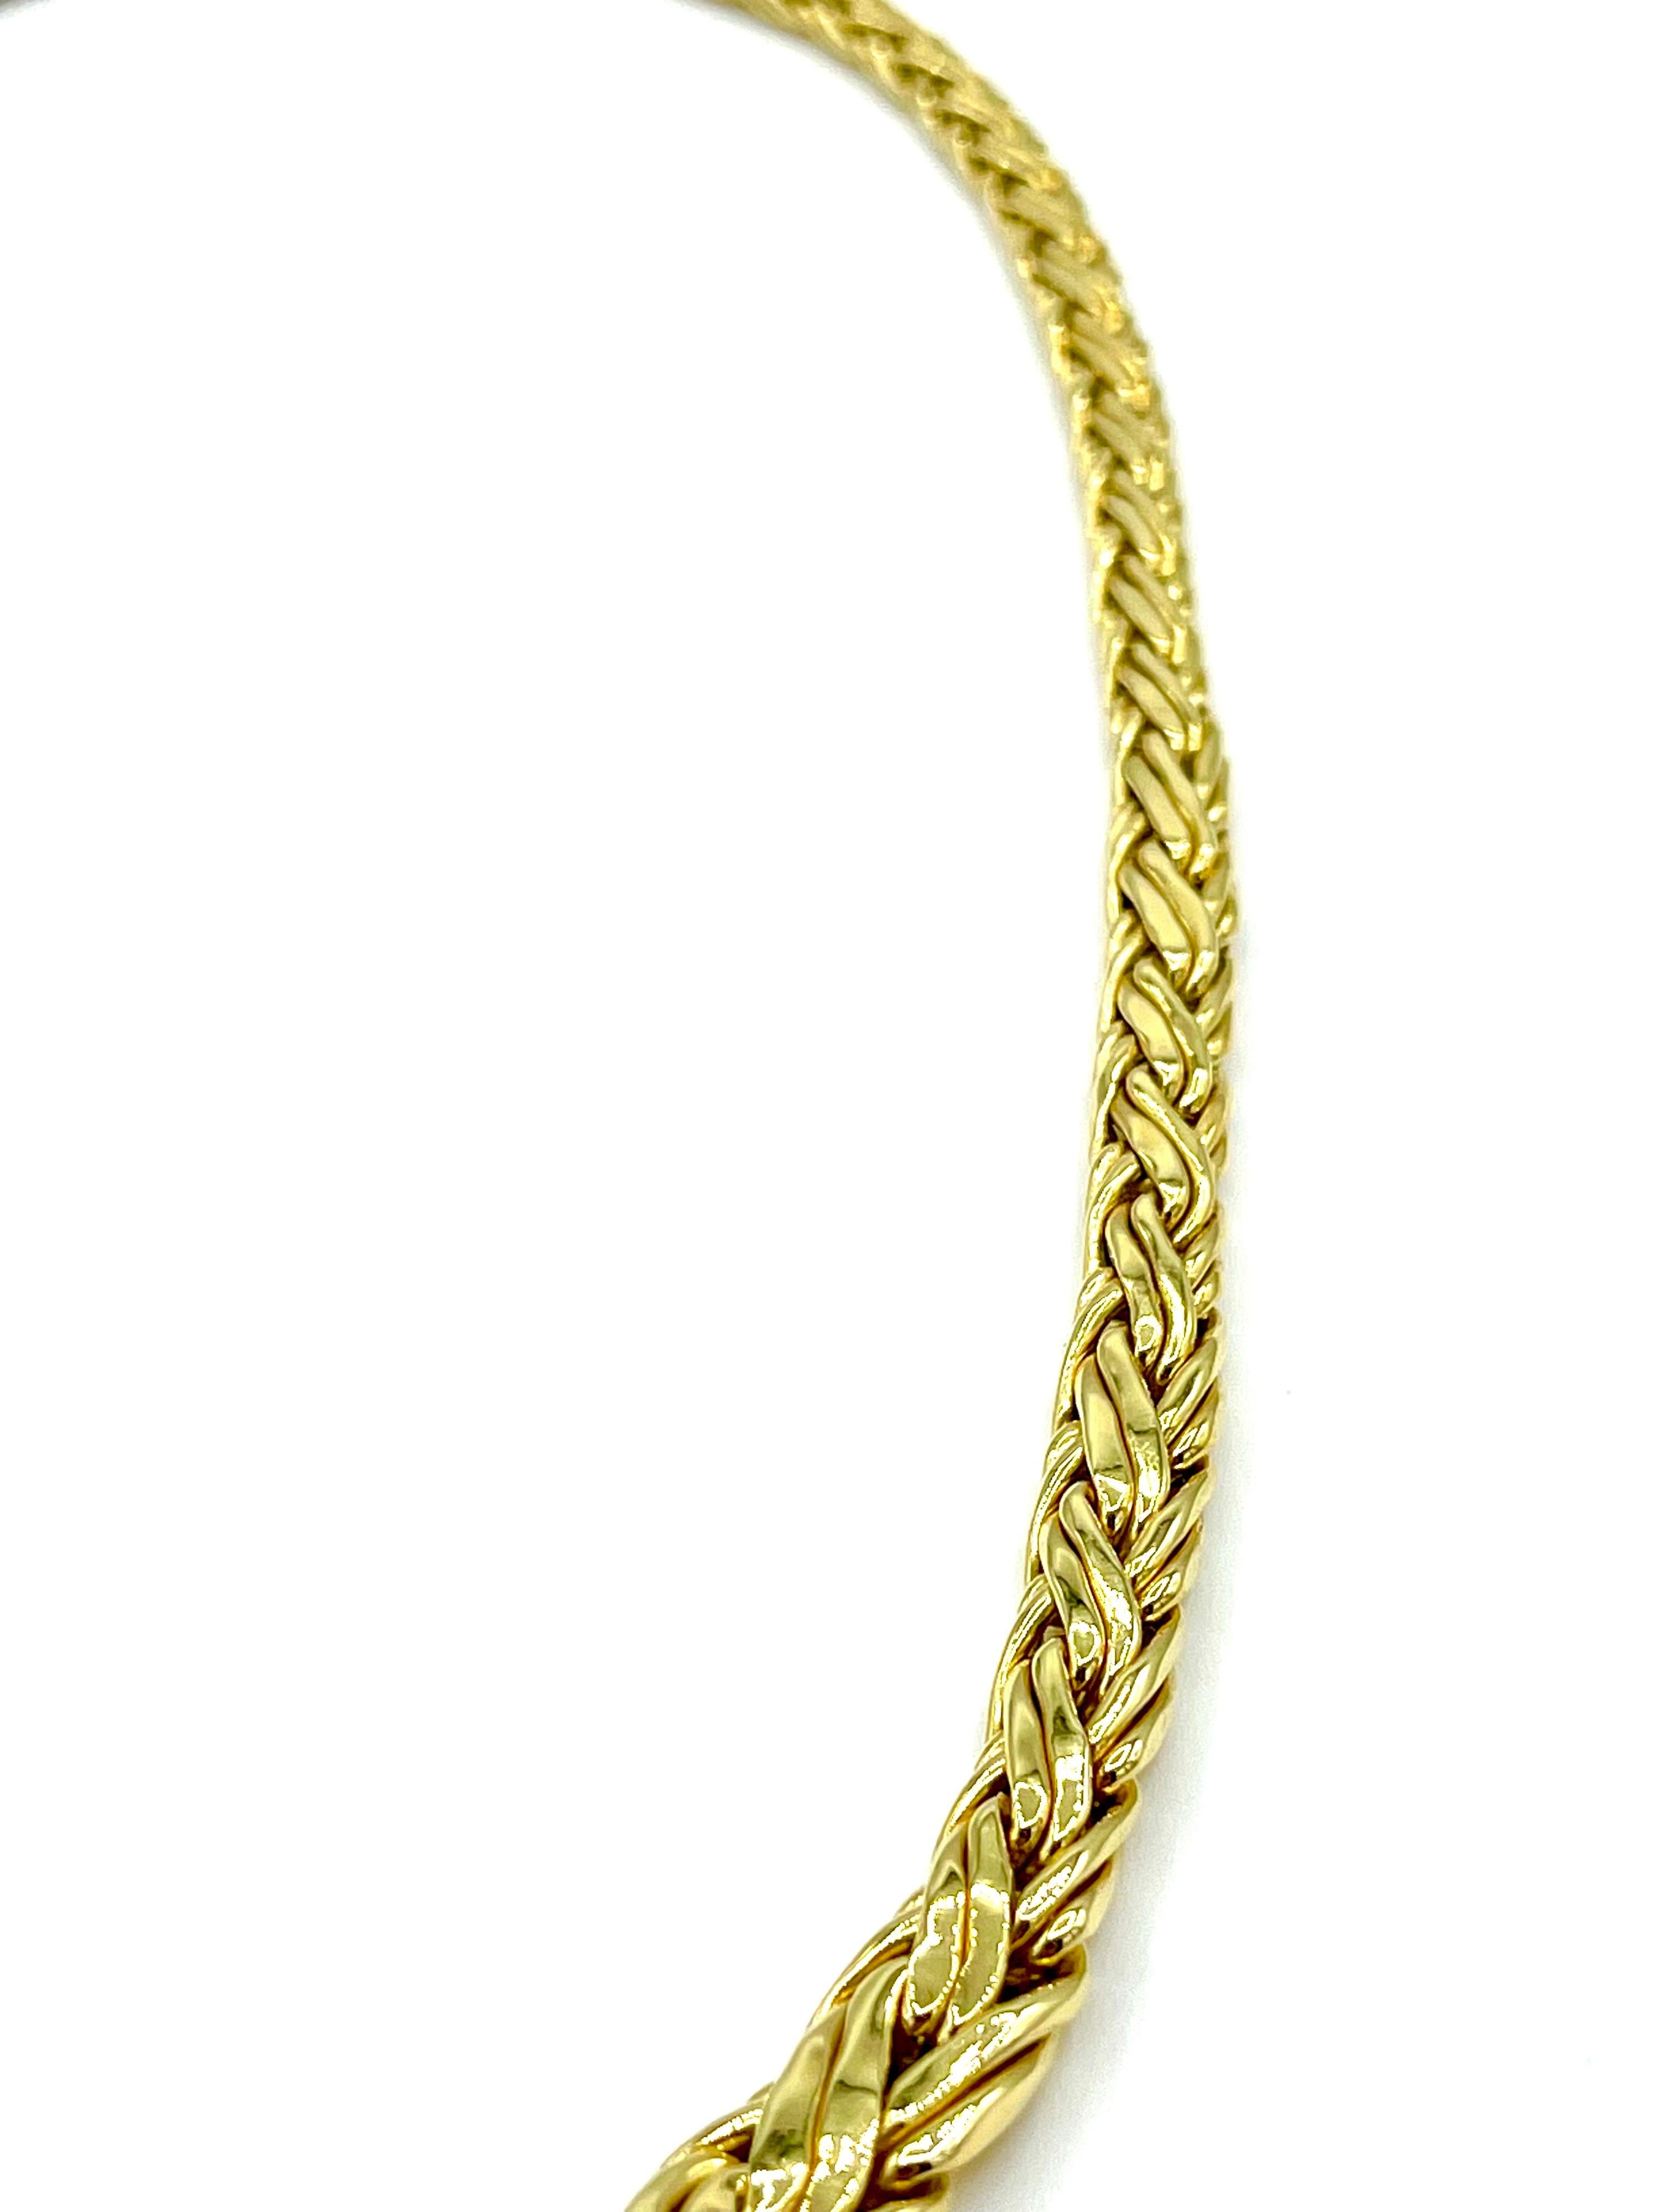 A simple and elegant Tiffany & Co. necklace!  Easy to wear  for any occaision.  This is a graduated byzantine style link necklace made in 18K yellow gold.  It measures 16.50 inches in length and features a hidden box clasp.  The clasp is signed